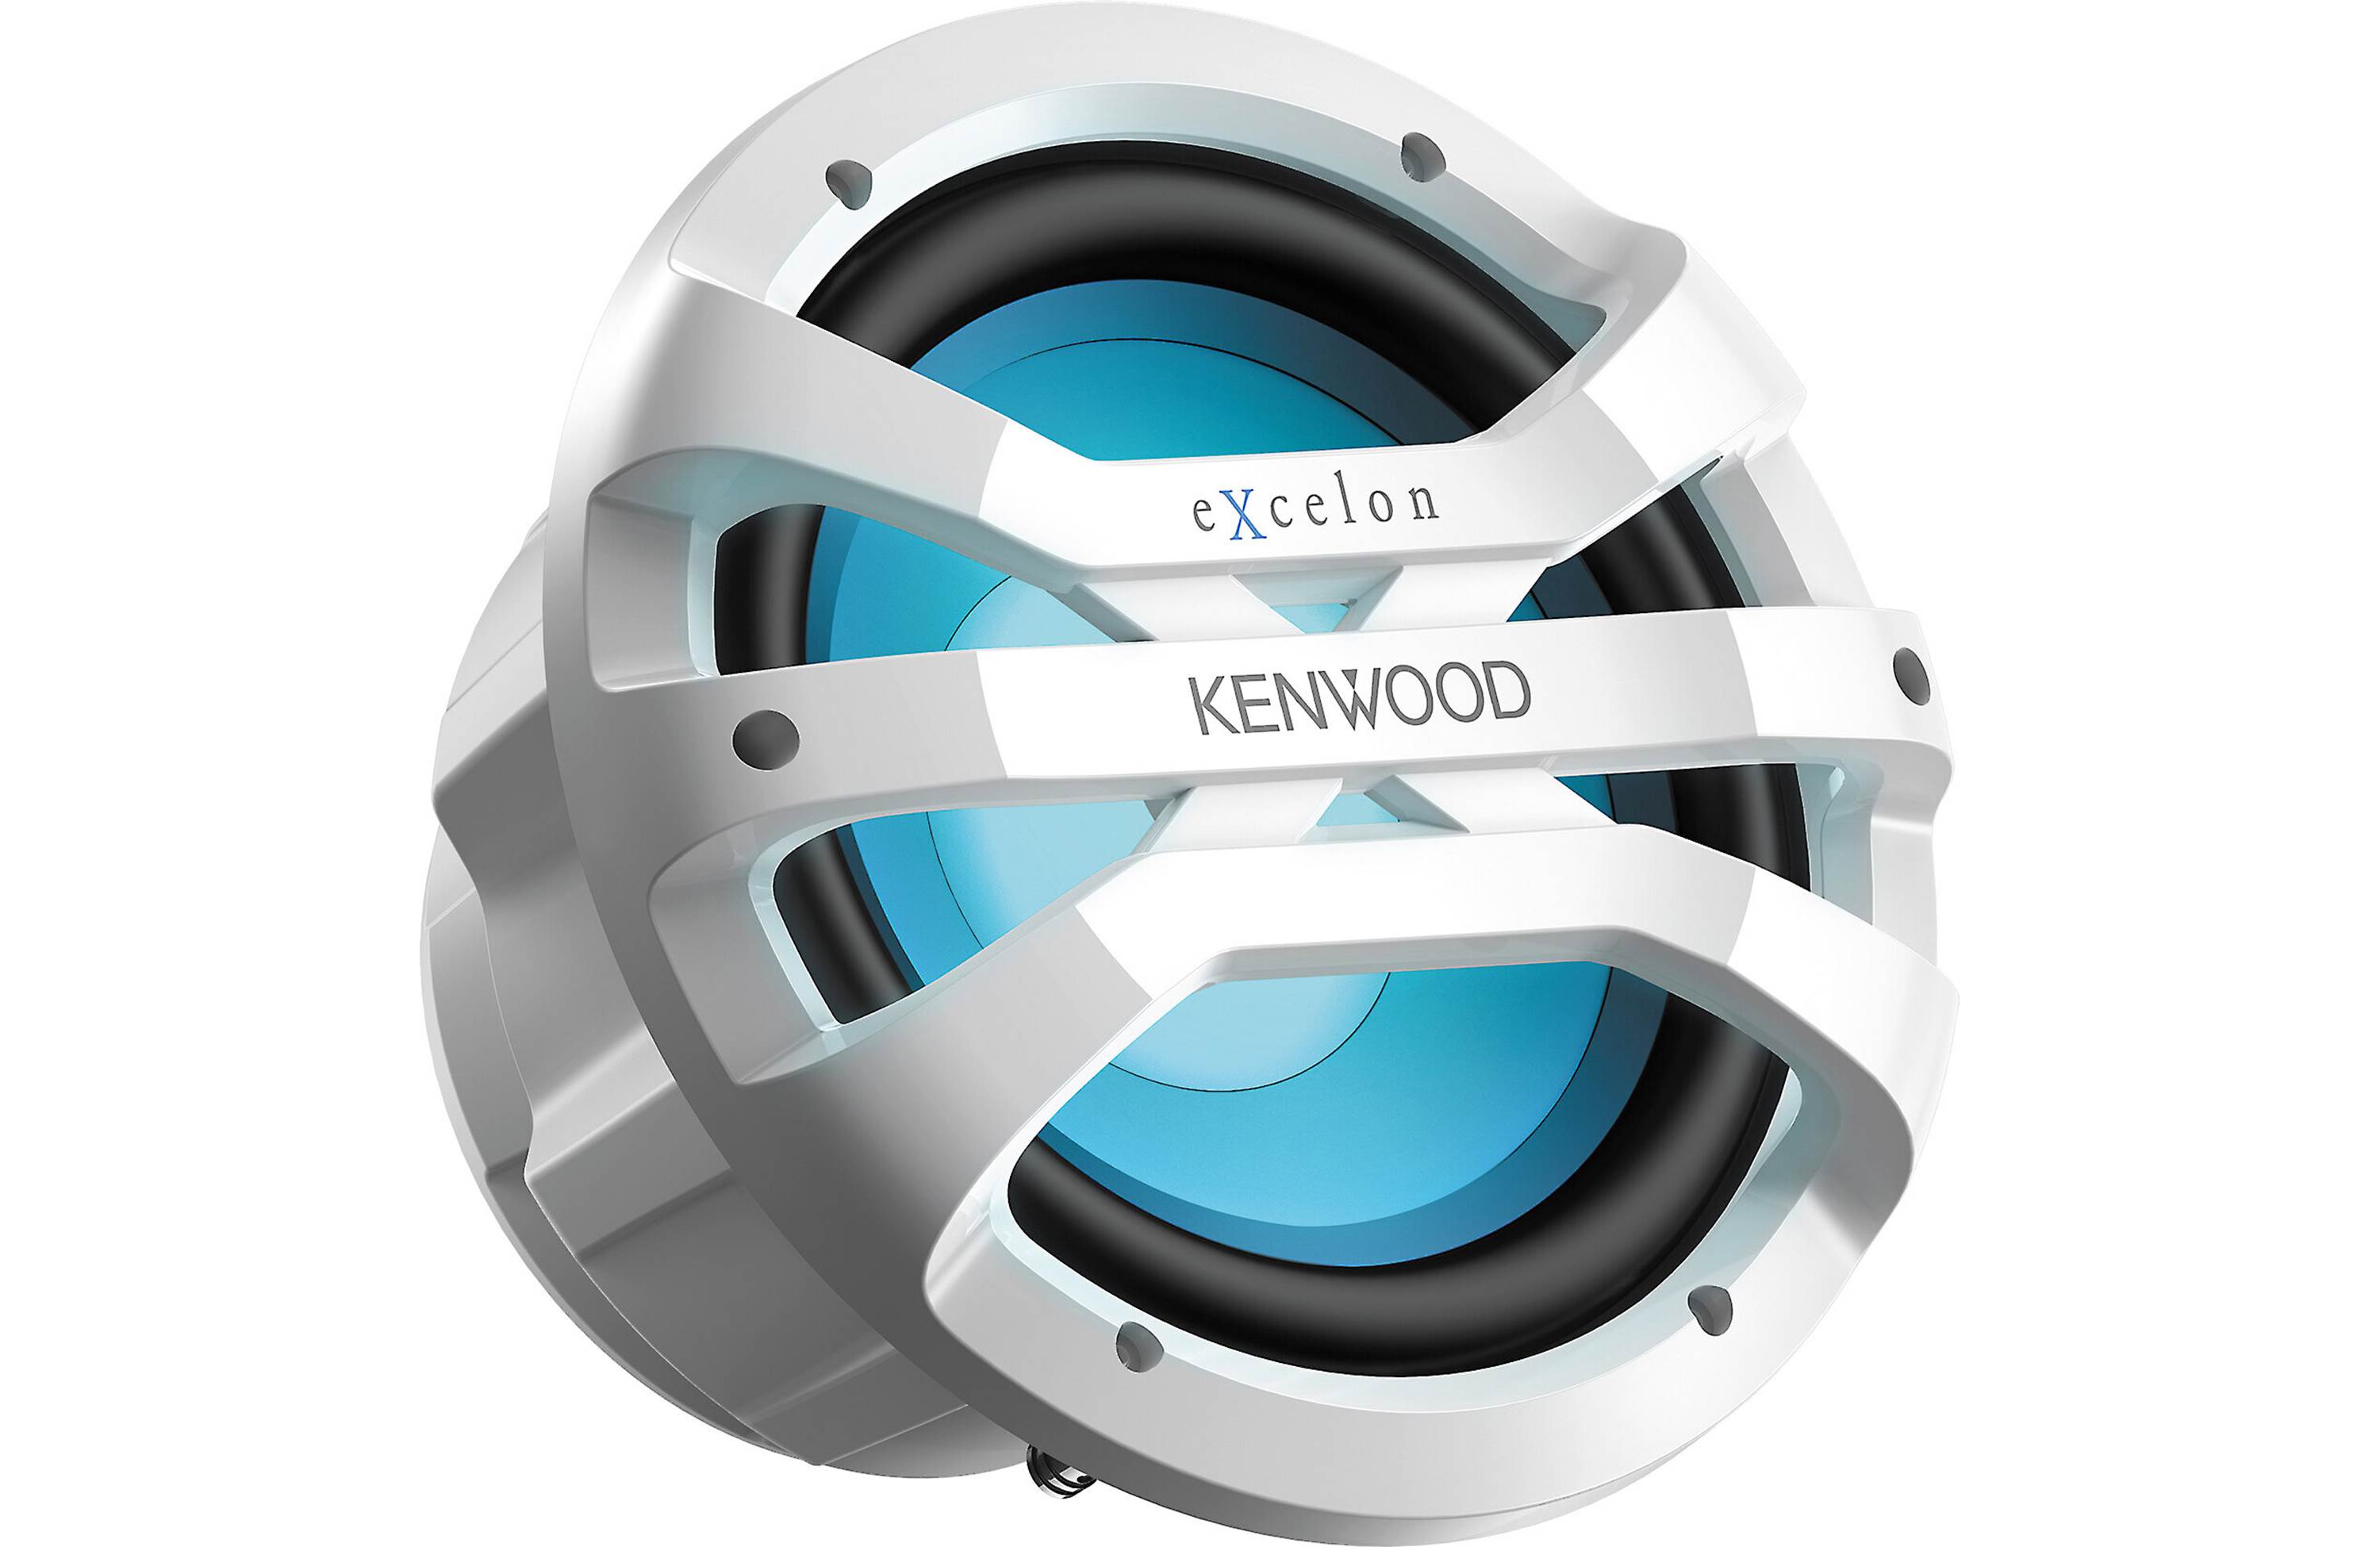 Kenwood Excelon Marine Subwoofer at Audio Visionz by Midwest Truck Accessories